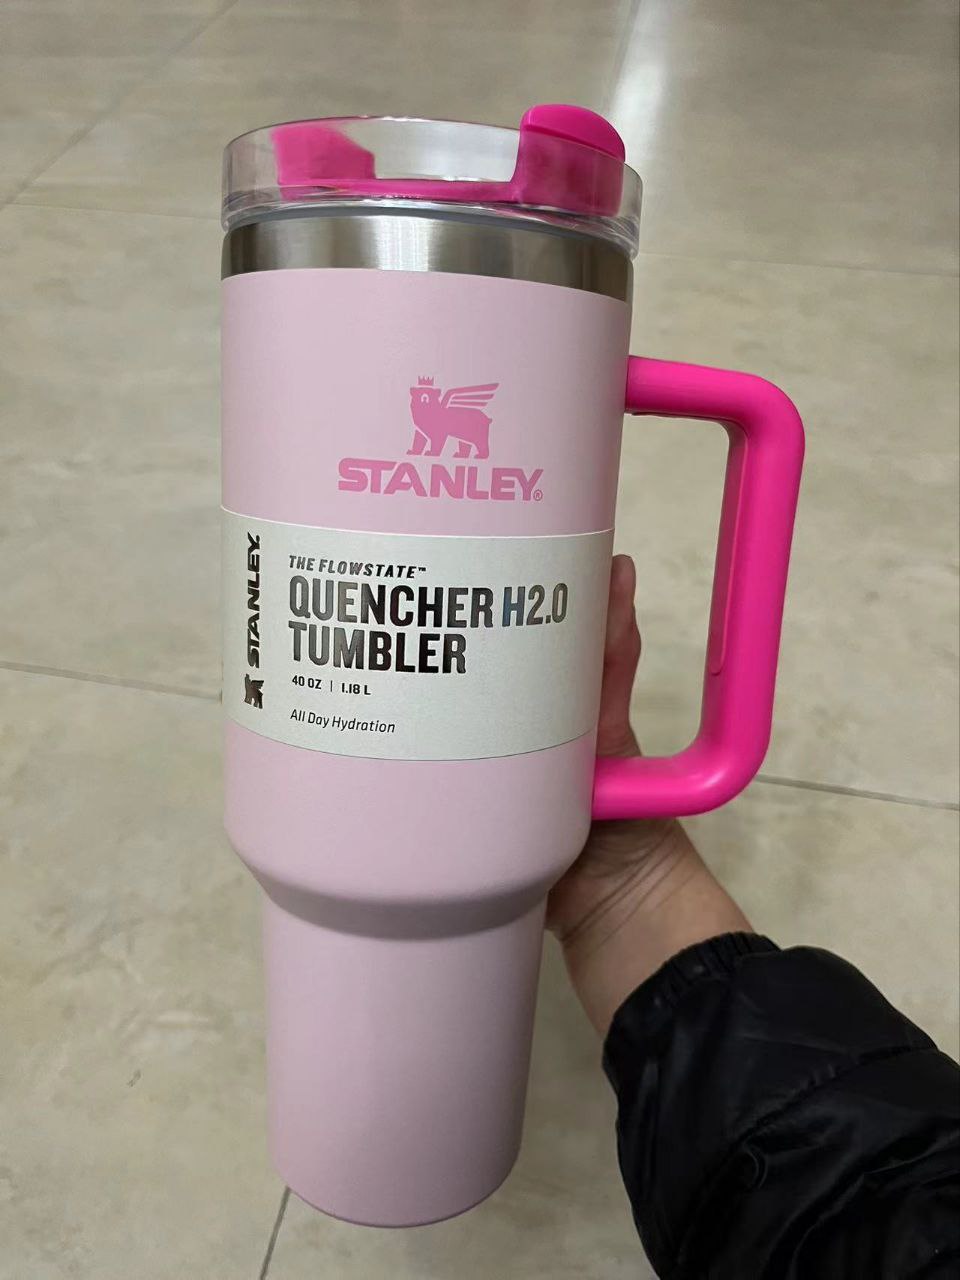 So super excited! I got the THE QUENCHER H2.0 FLOWSTATE™ TUMBLER, 40